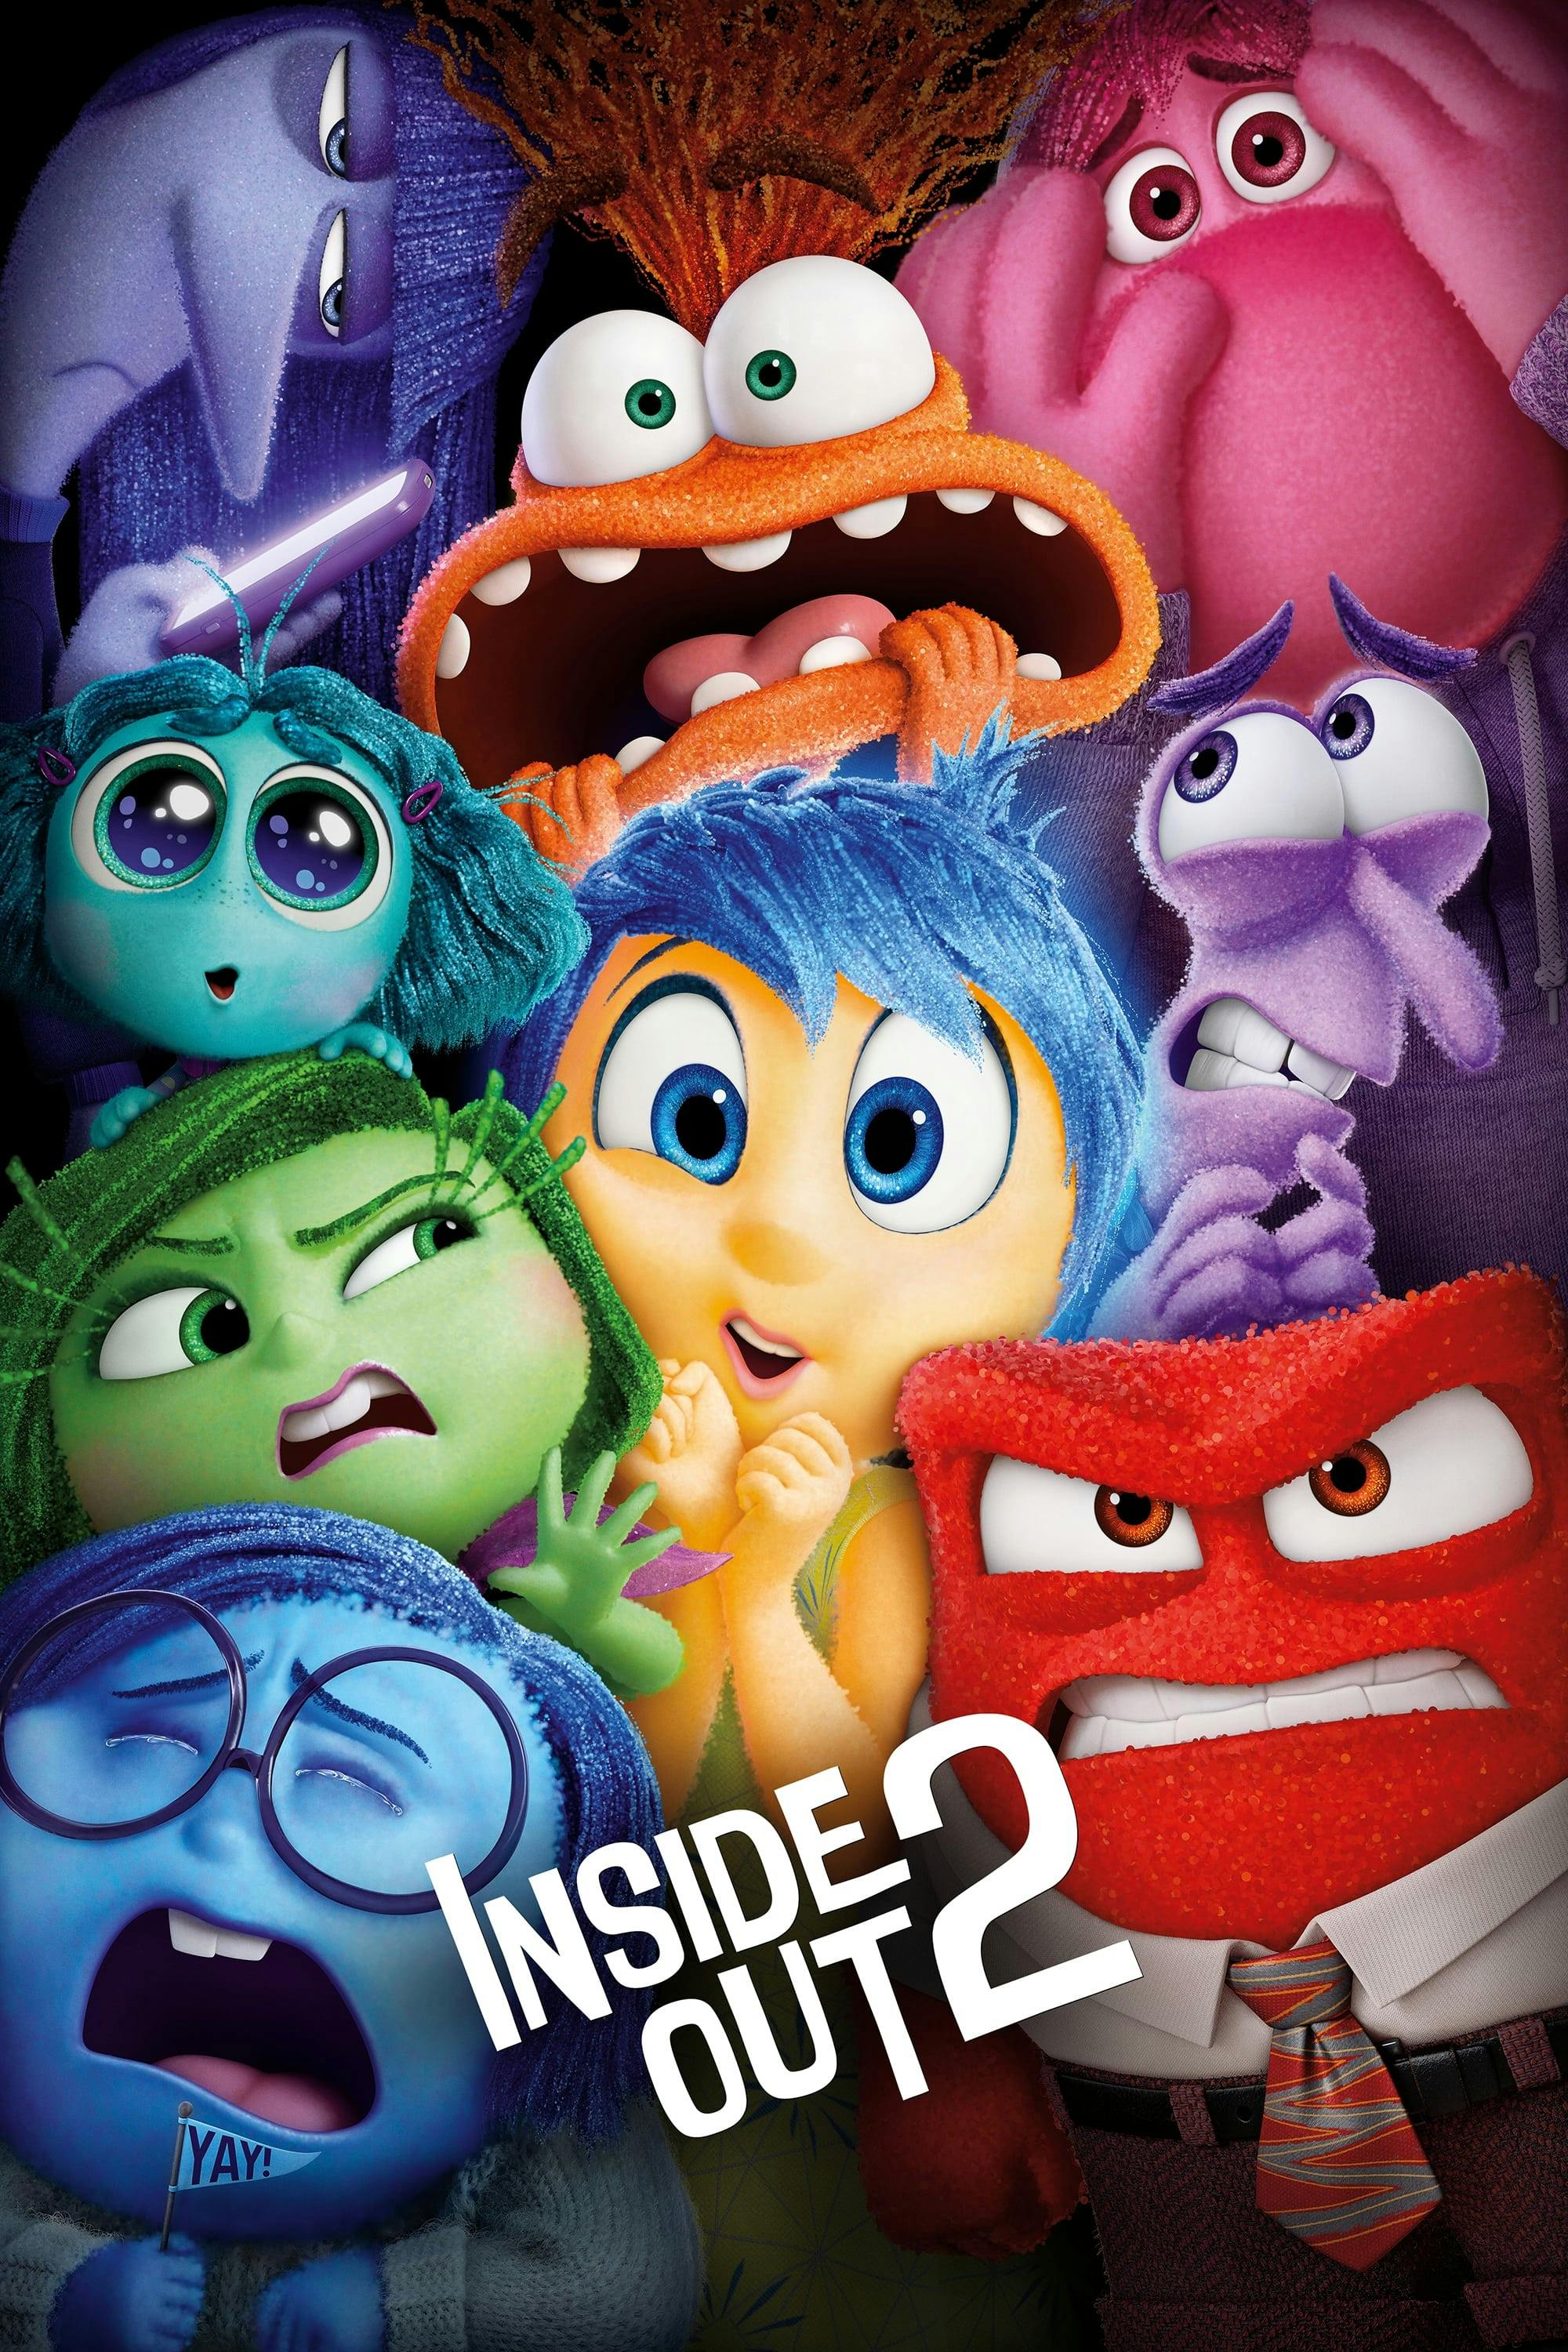 Movie poster of "Inside Out 2"